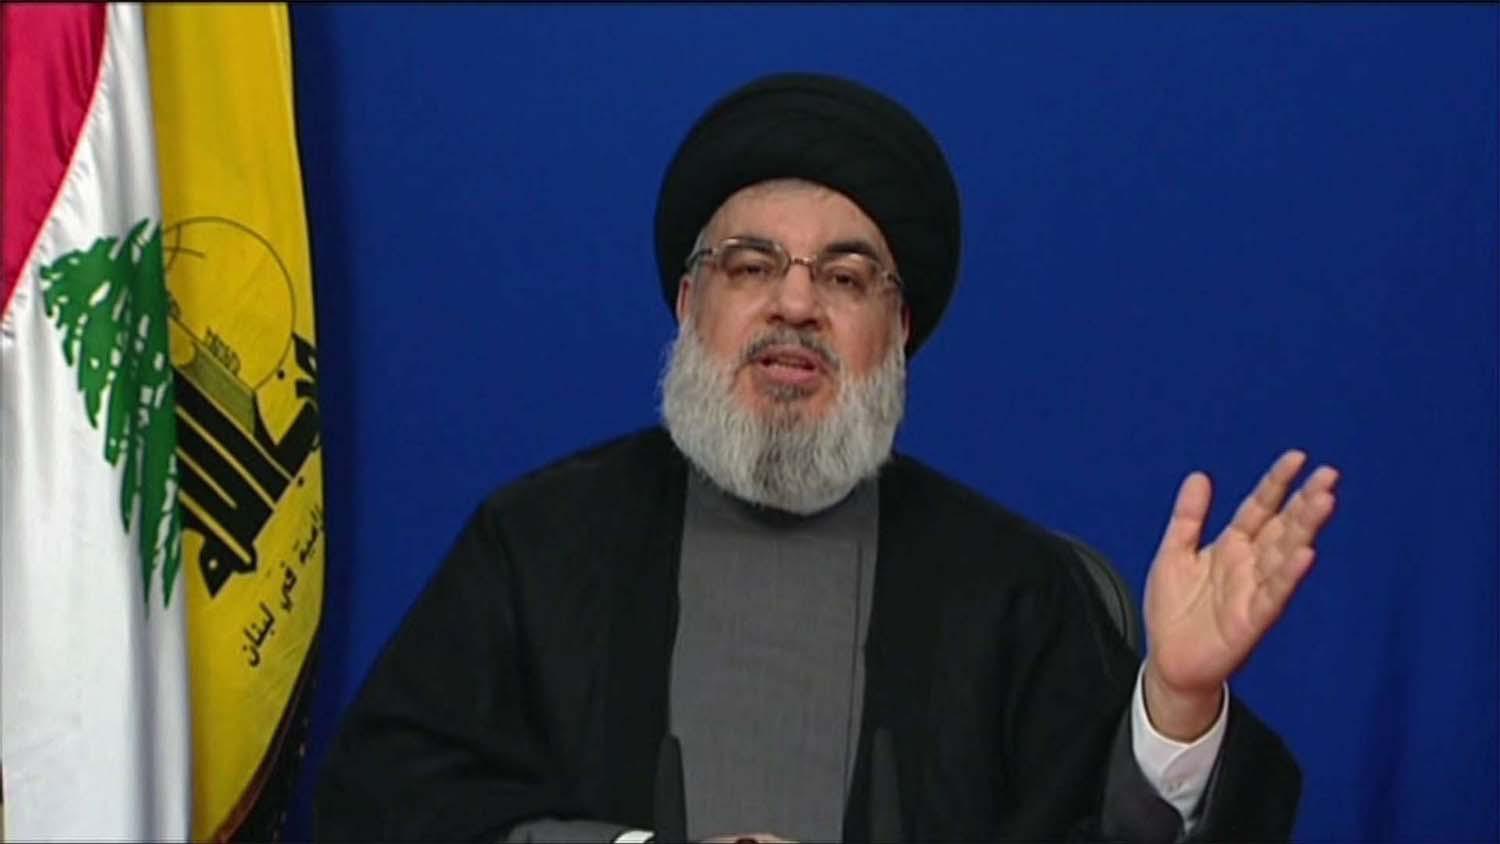 Nasrallah's move could put Lebanon in a deeper crisis 